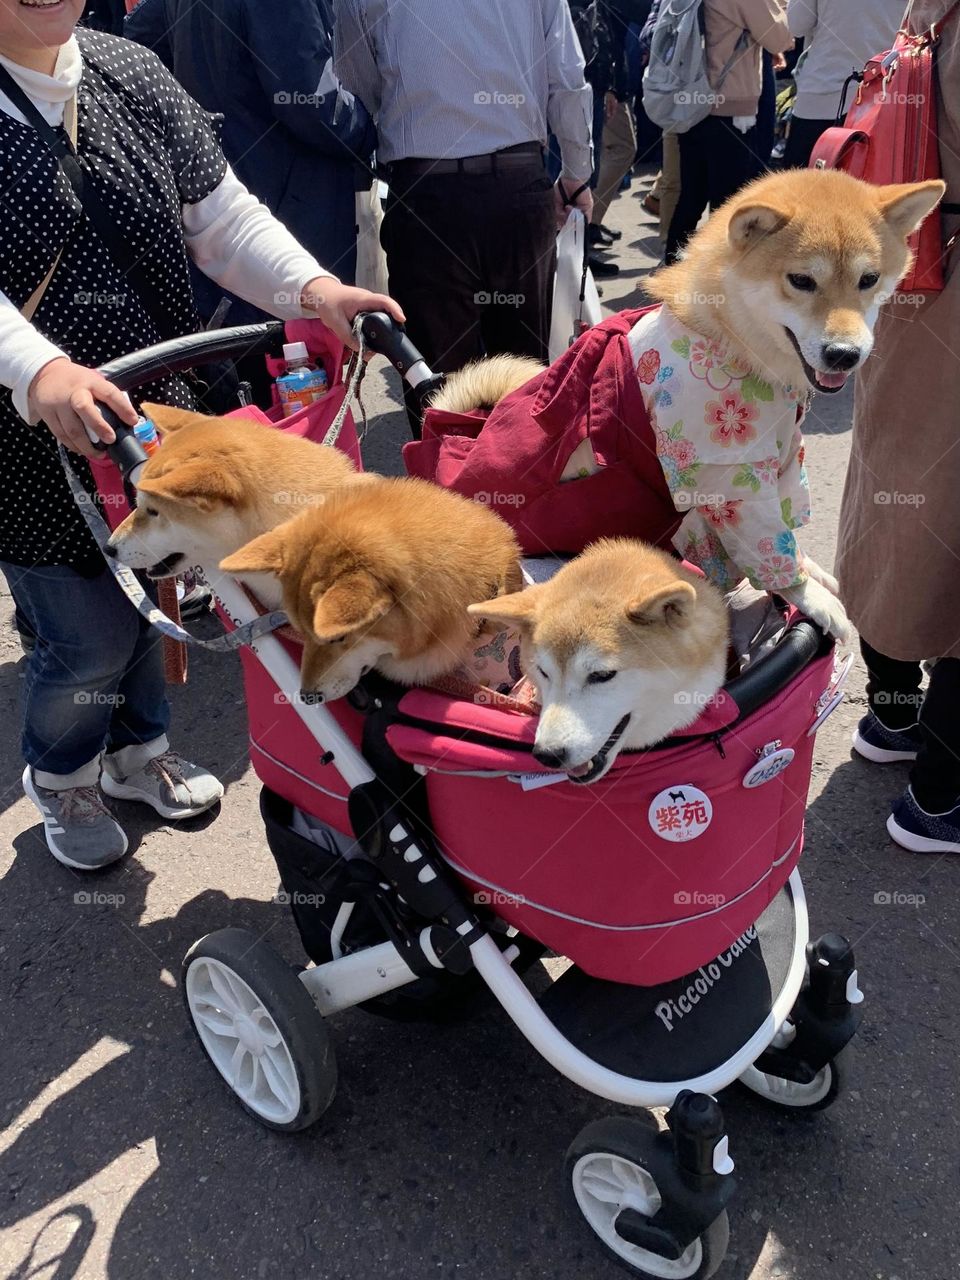 Dogs in the cart